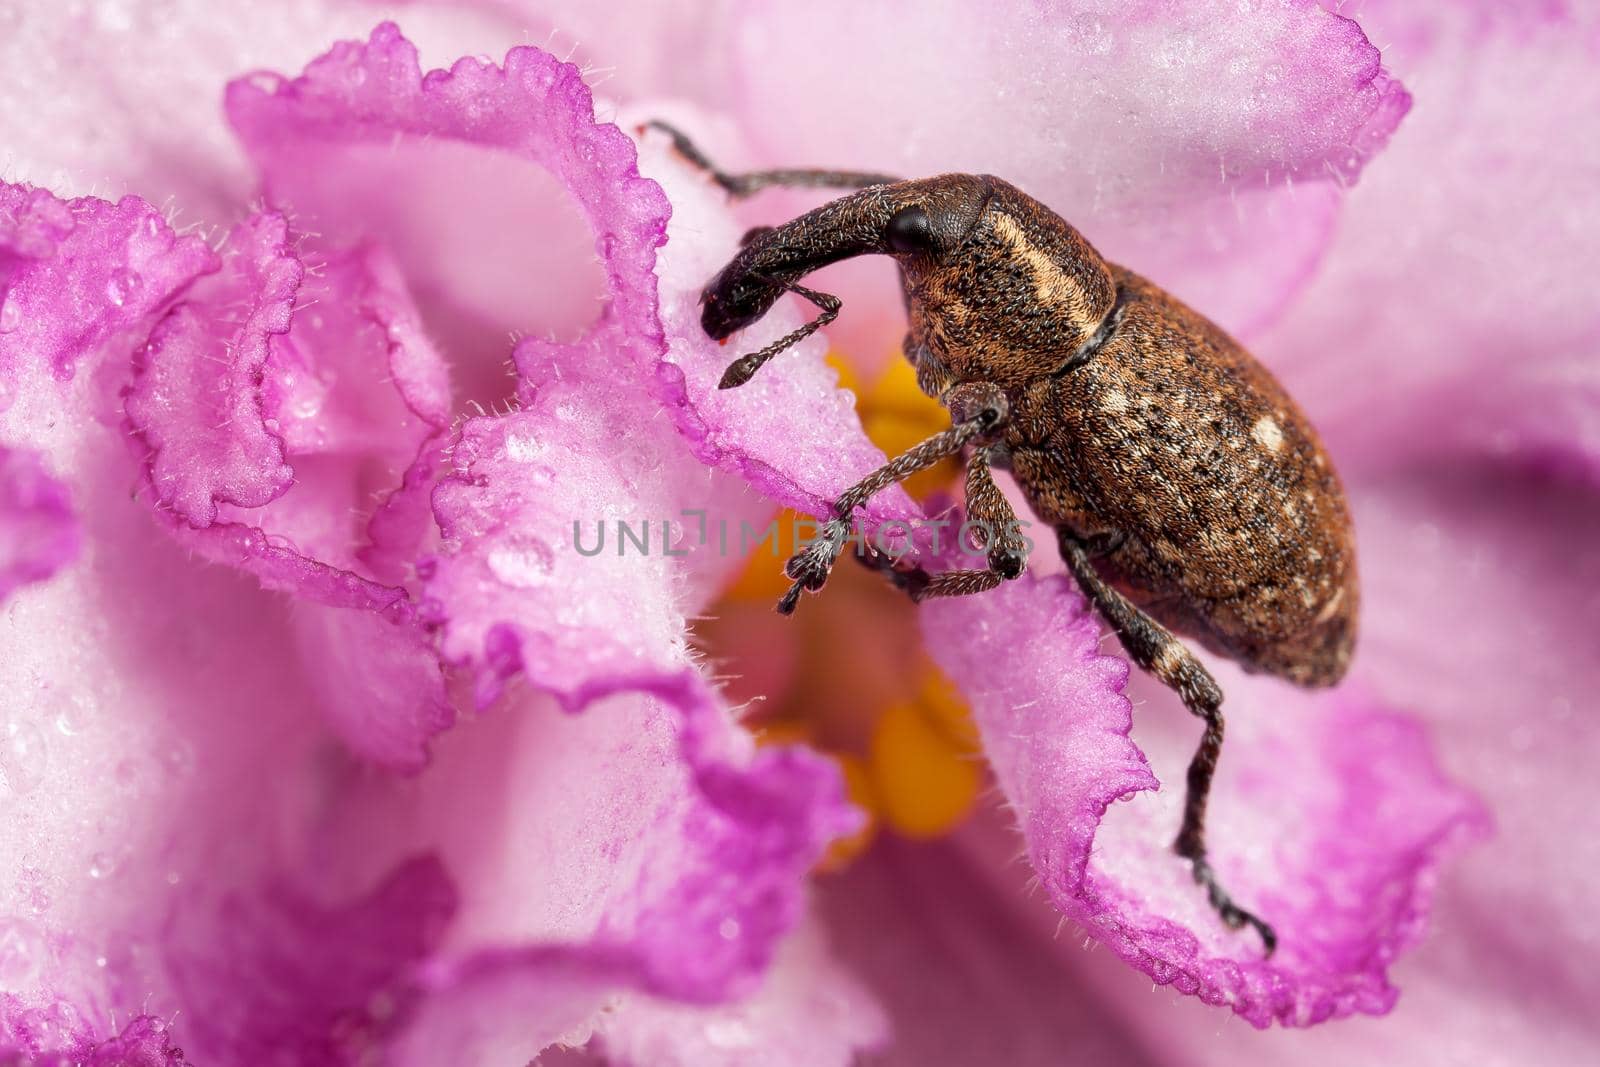 Polydrusus on the pink flower by Lincikas